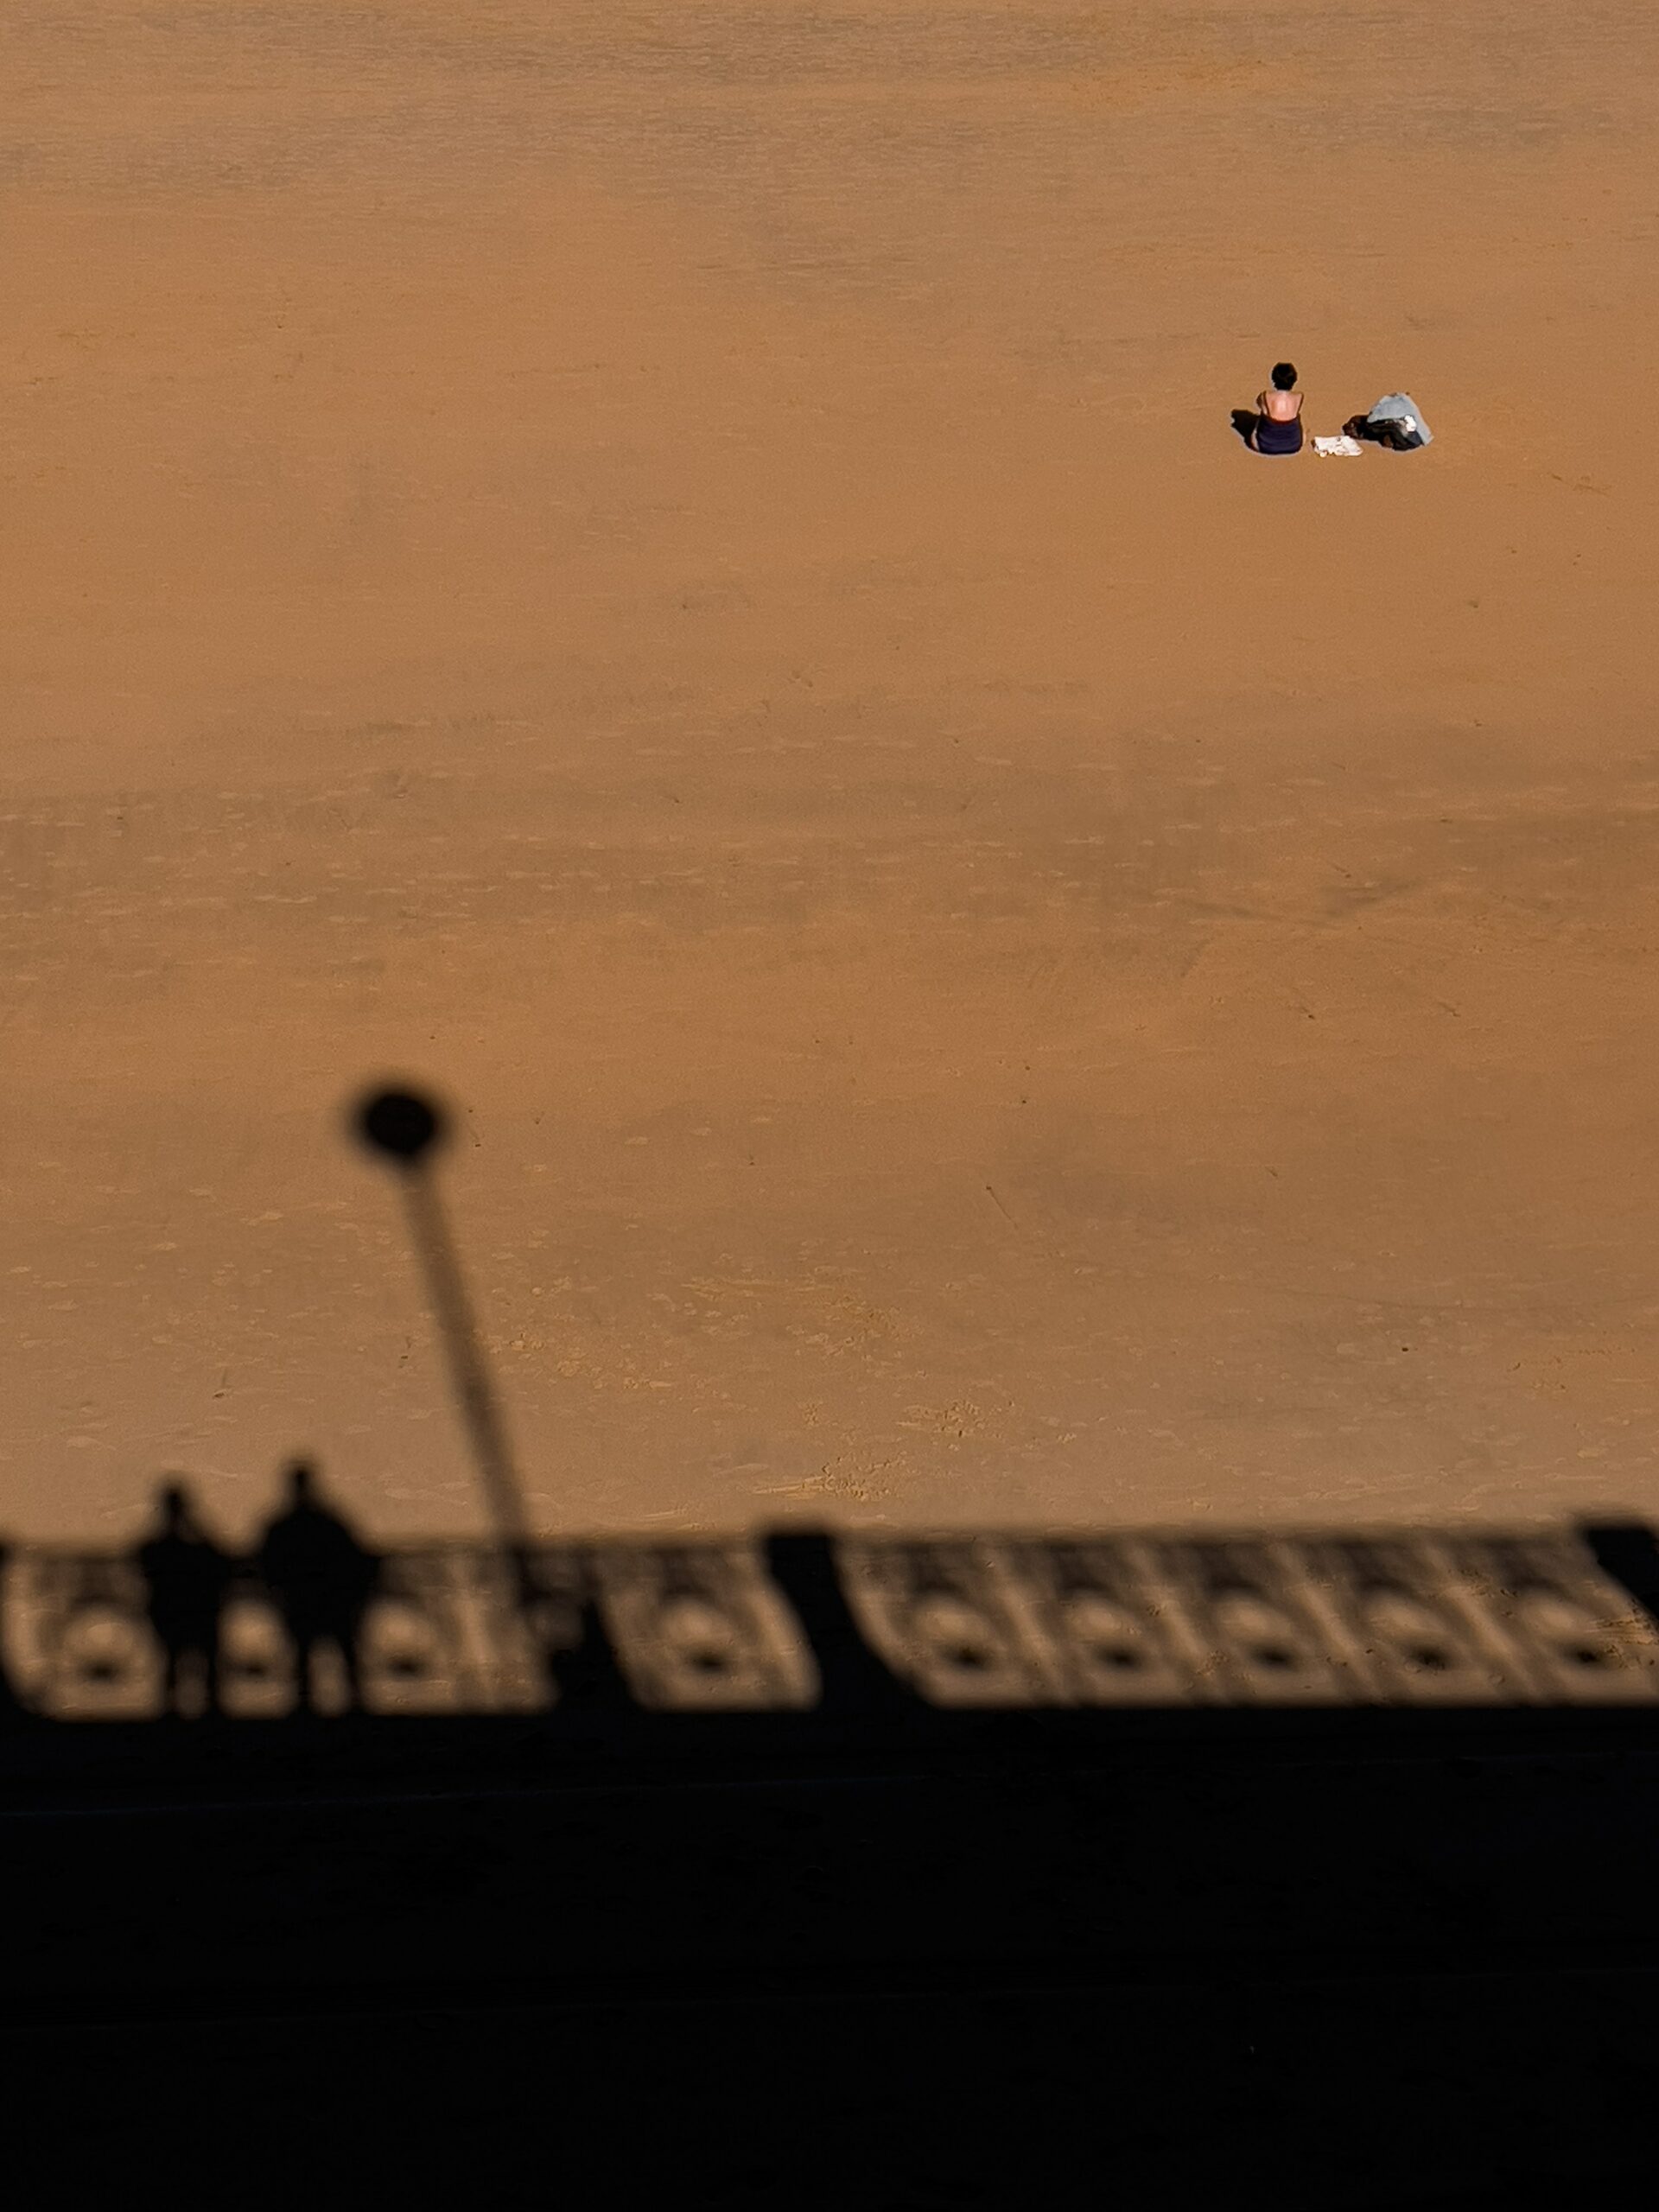 A person sitting alone on a large expanse of a sandy beach. Behind them is a shadow of two people standing together on a bridge.